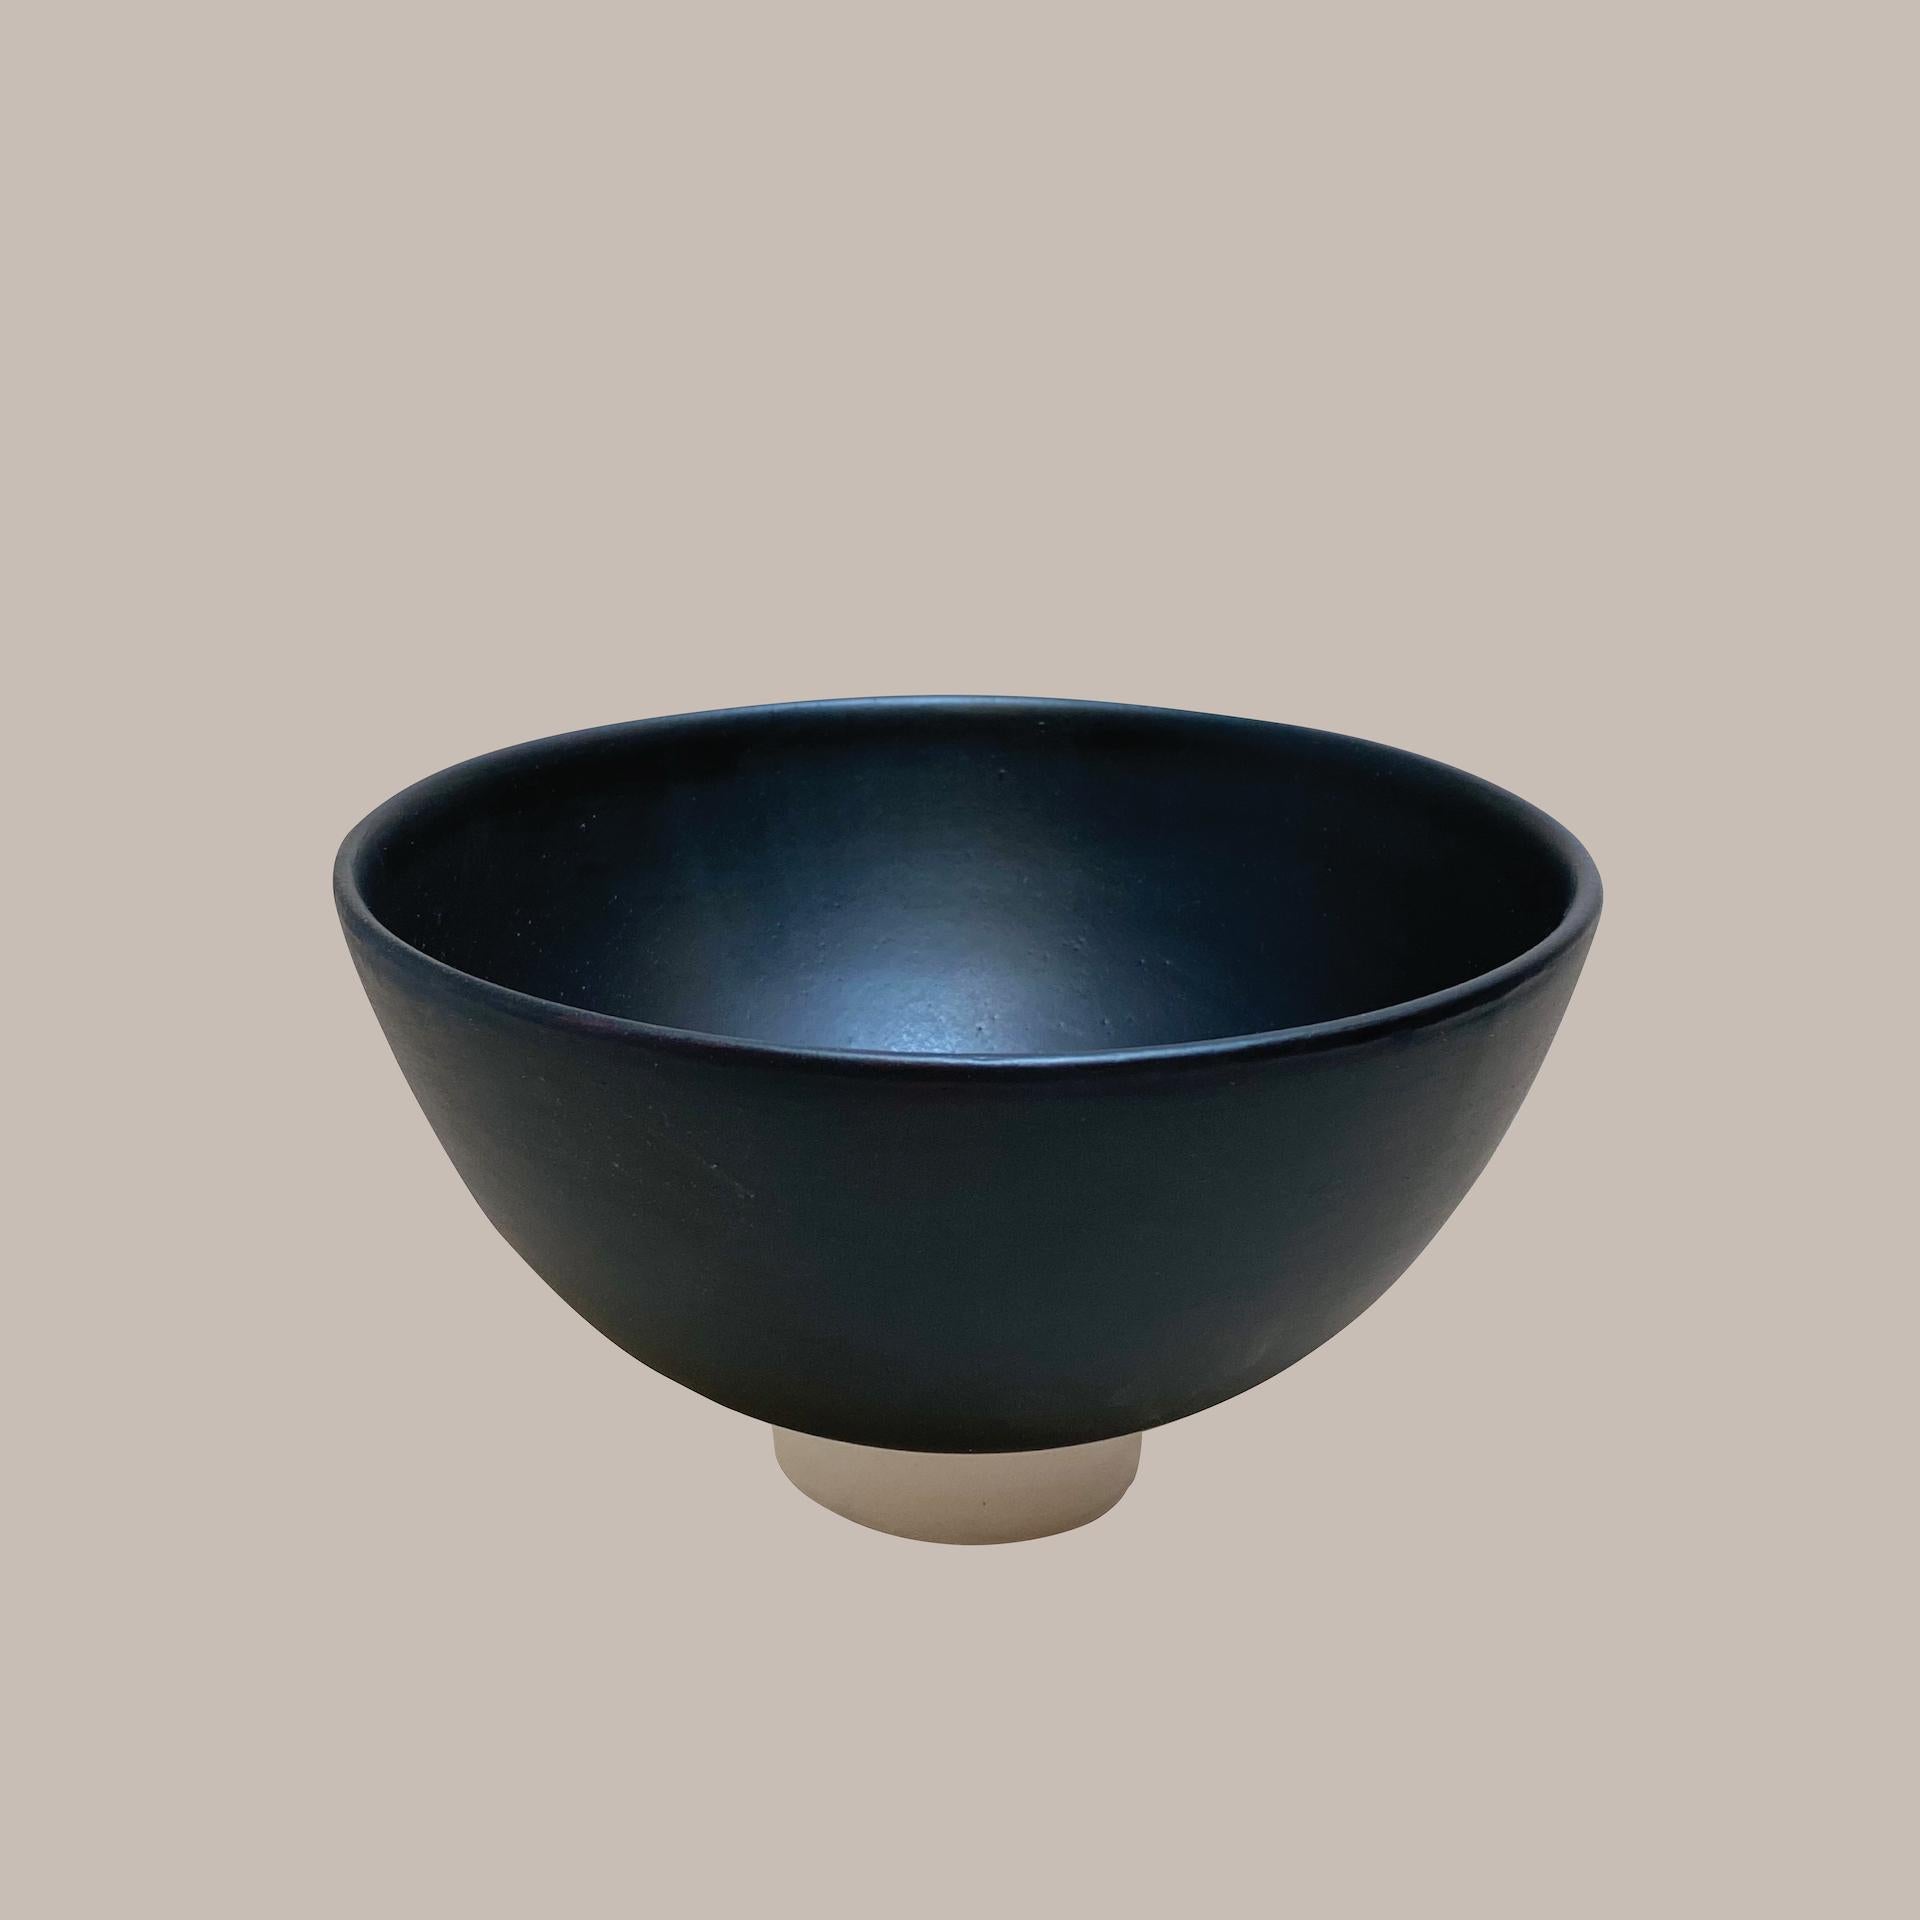 Ott another paradigmatic handmade ceramic bowl by Studio Yoon Seok-hyeon
2019
Dimensions: W 20 x H 9 cm
Materials: Ott(Natural resin from Ott tree), porcelain
700g

It is available to customize various colors in Ott's natural color